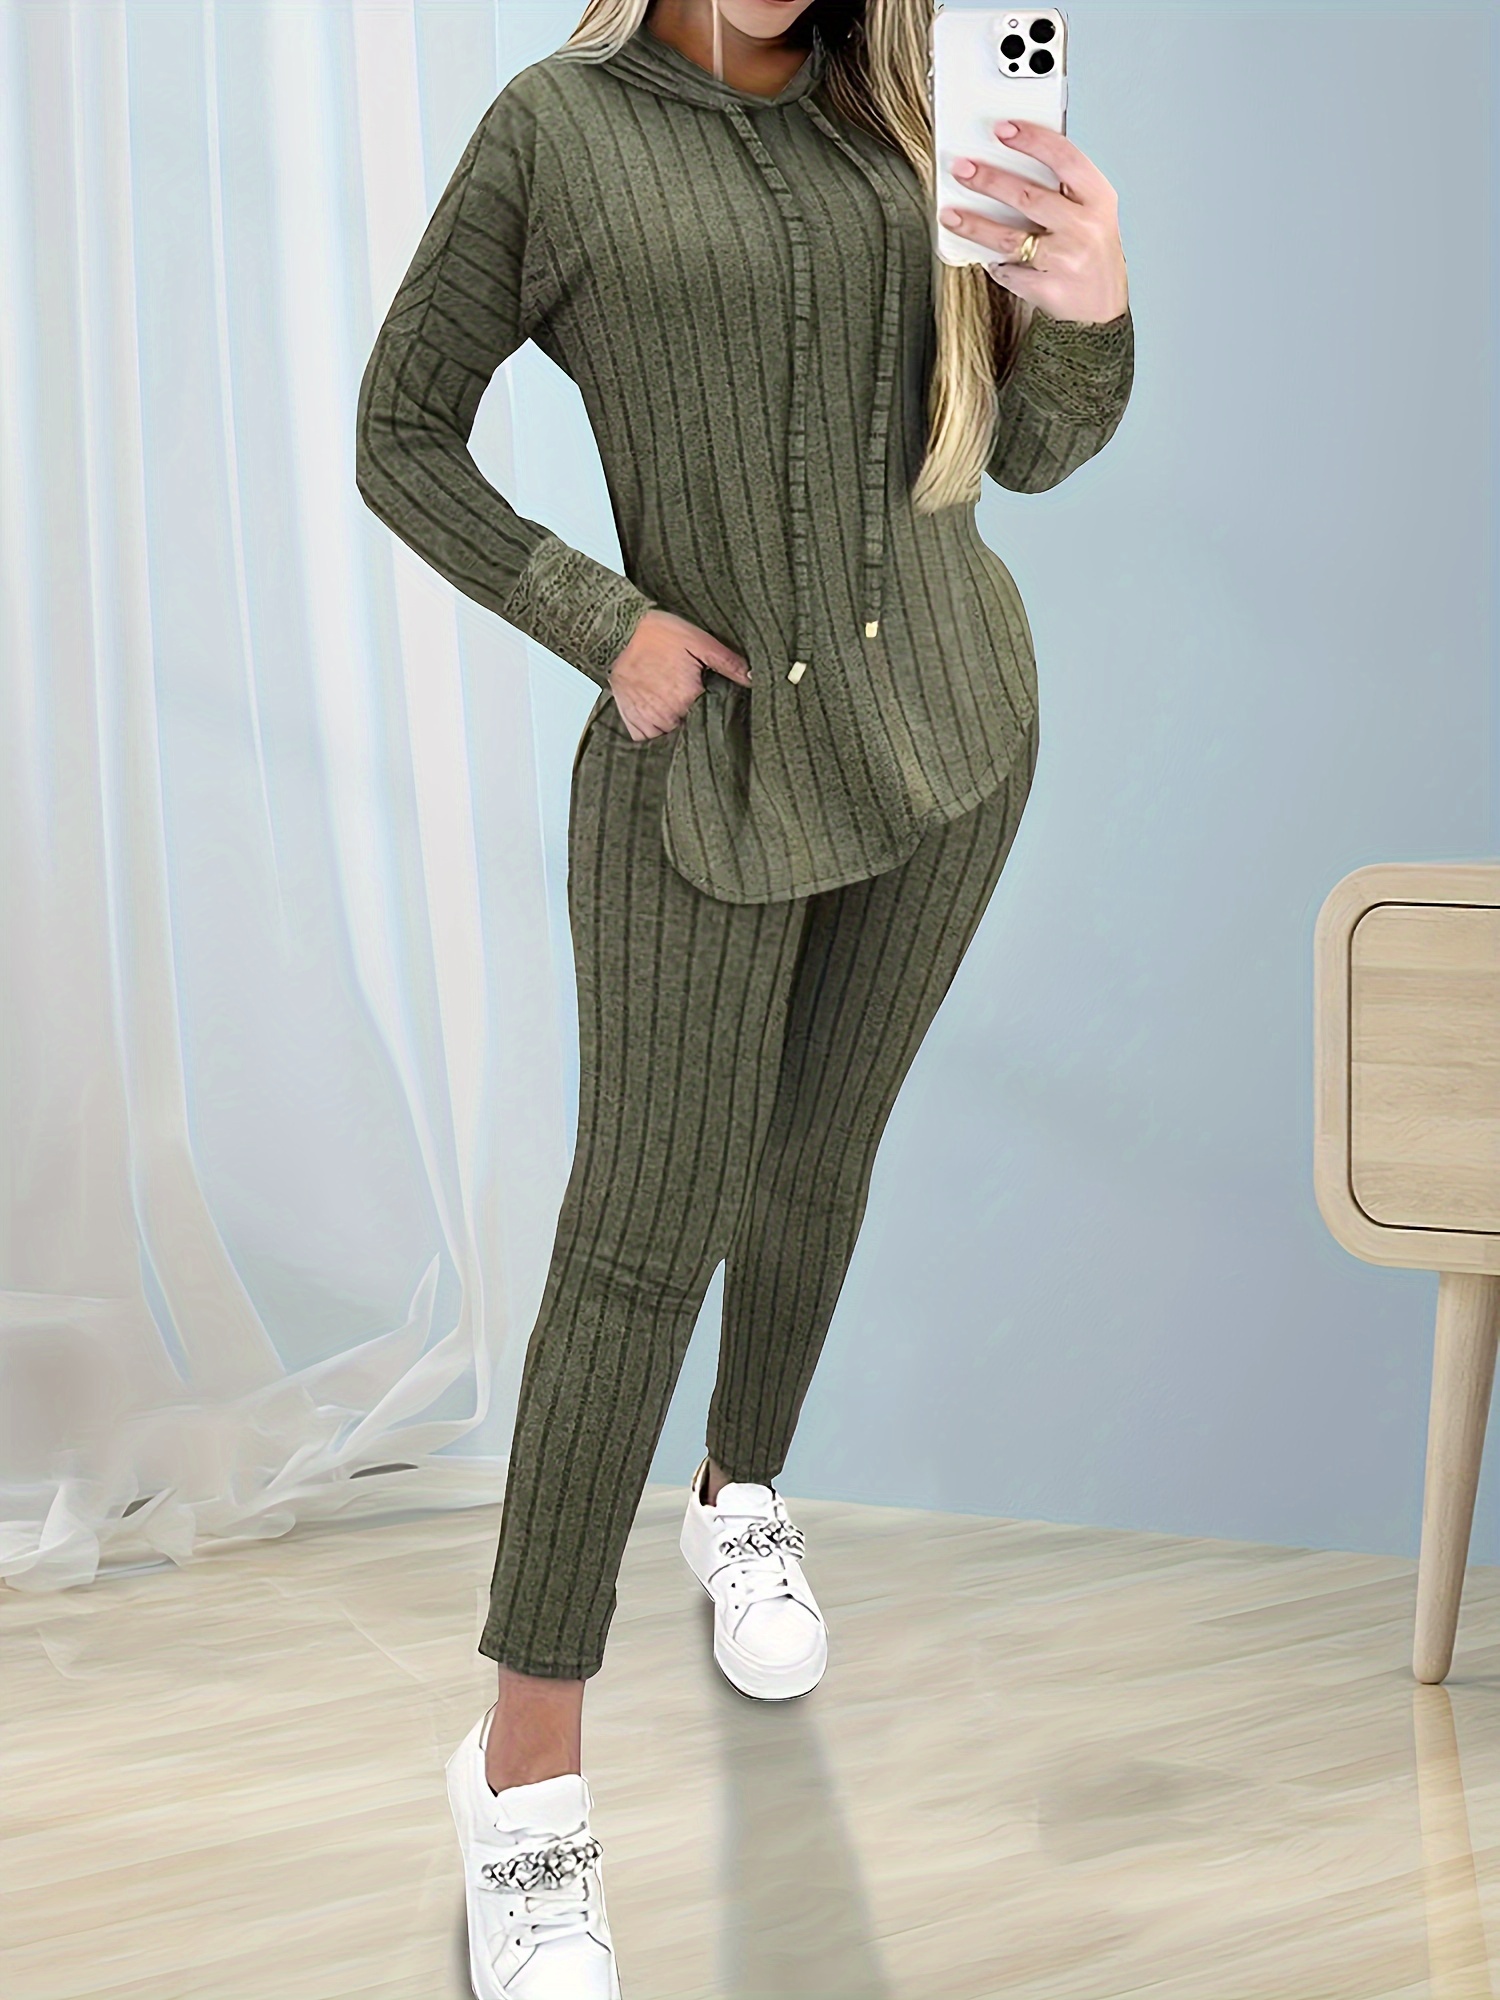 Casual Comfy Two-piece Set, Drawstring Long Sleeve Top & Solid Skinny  Leggings Outfits, Women's Clothing